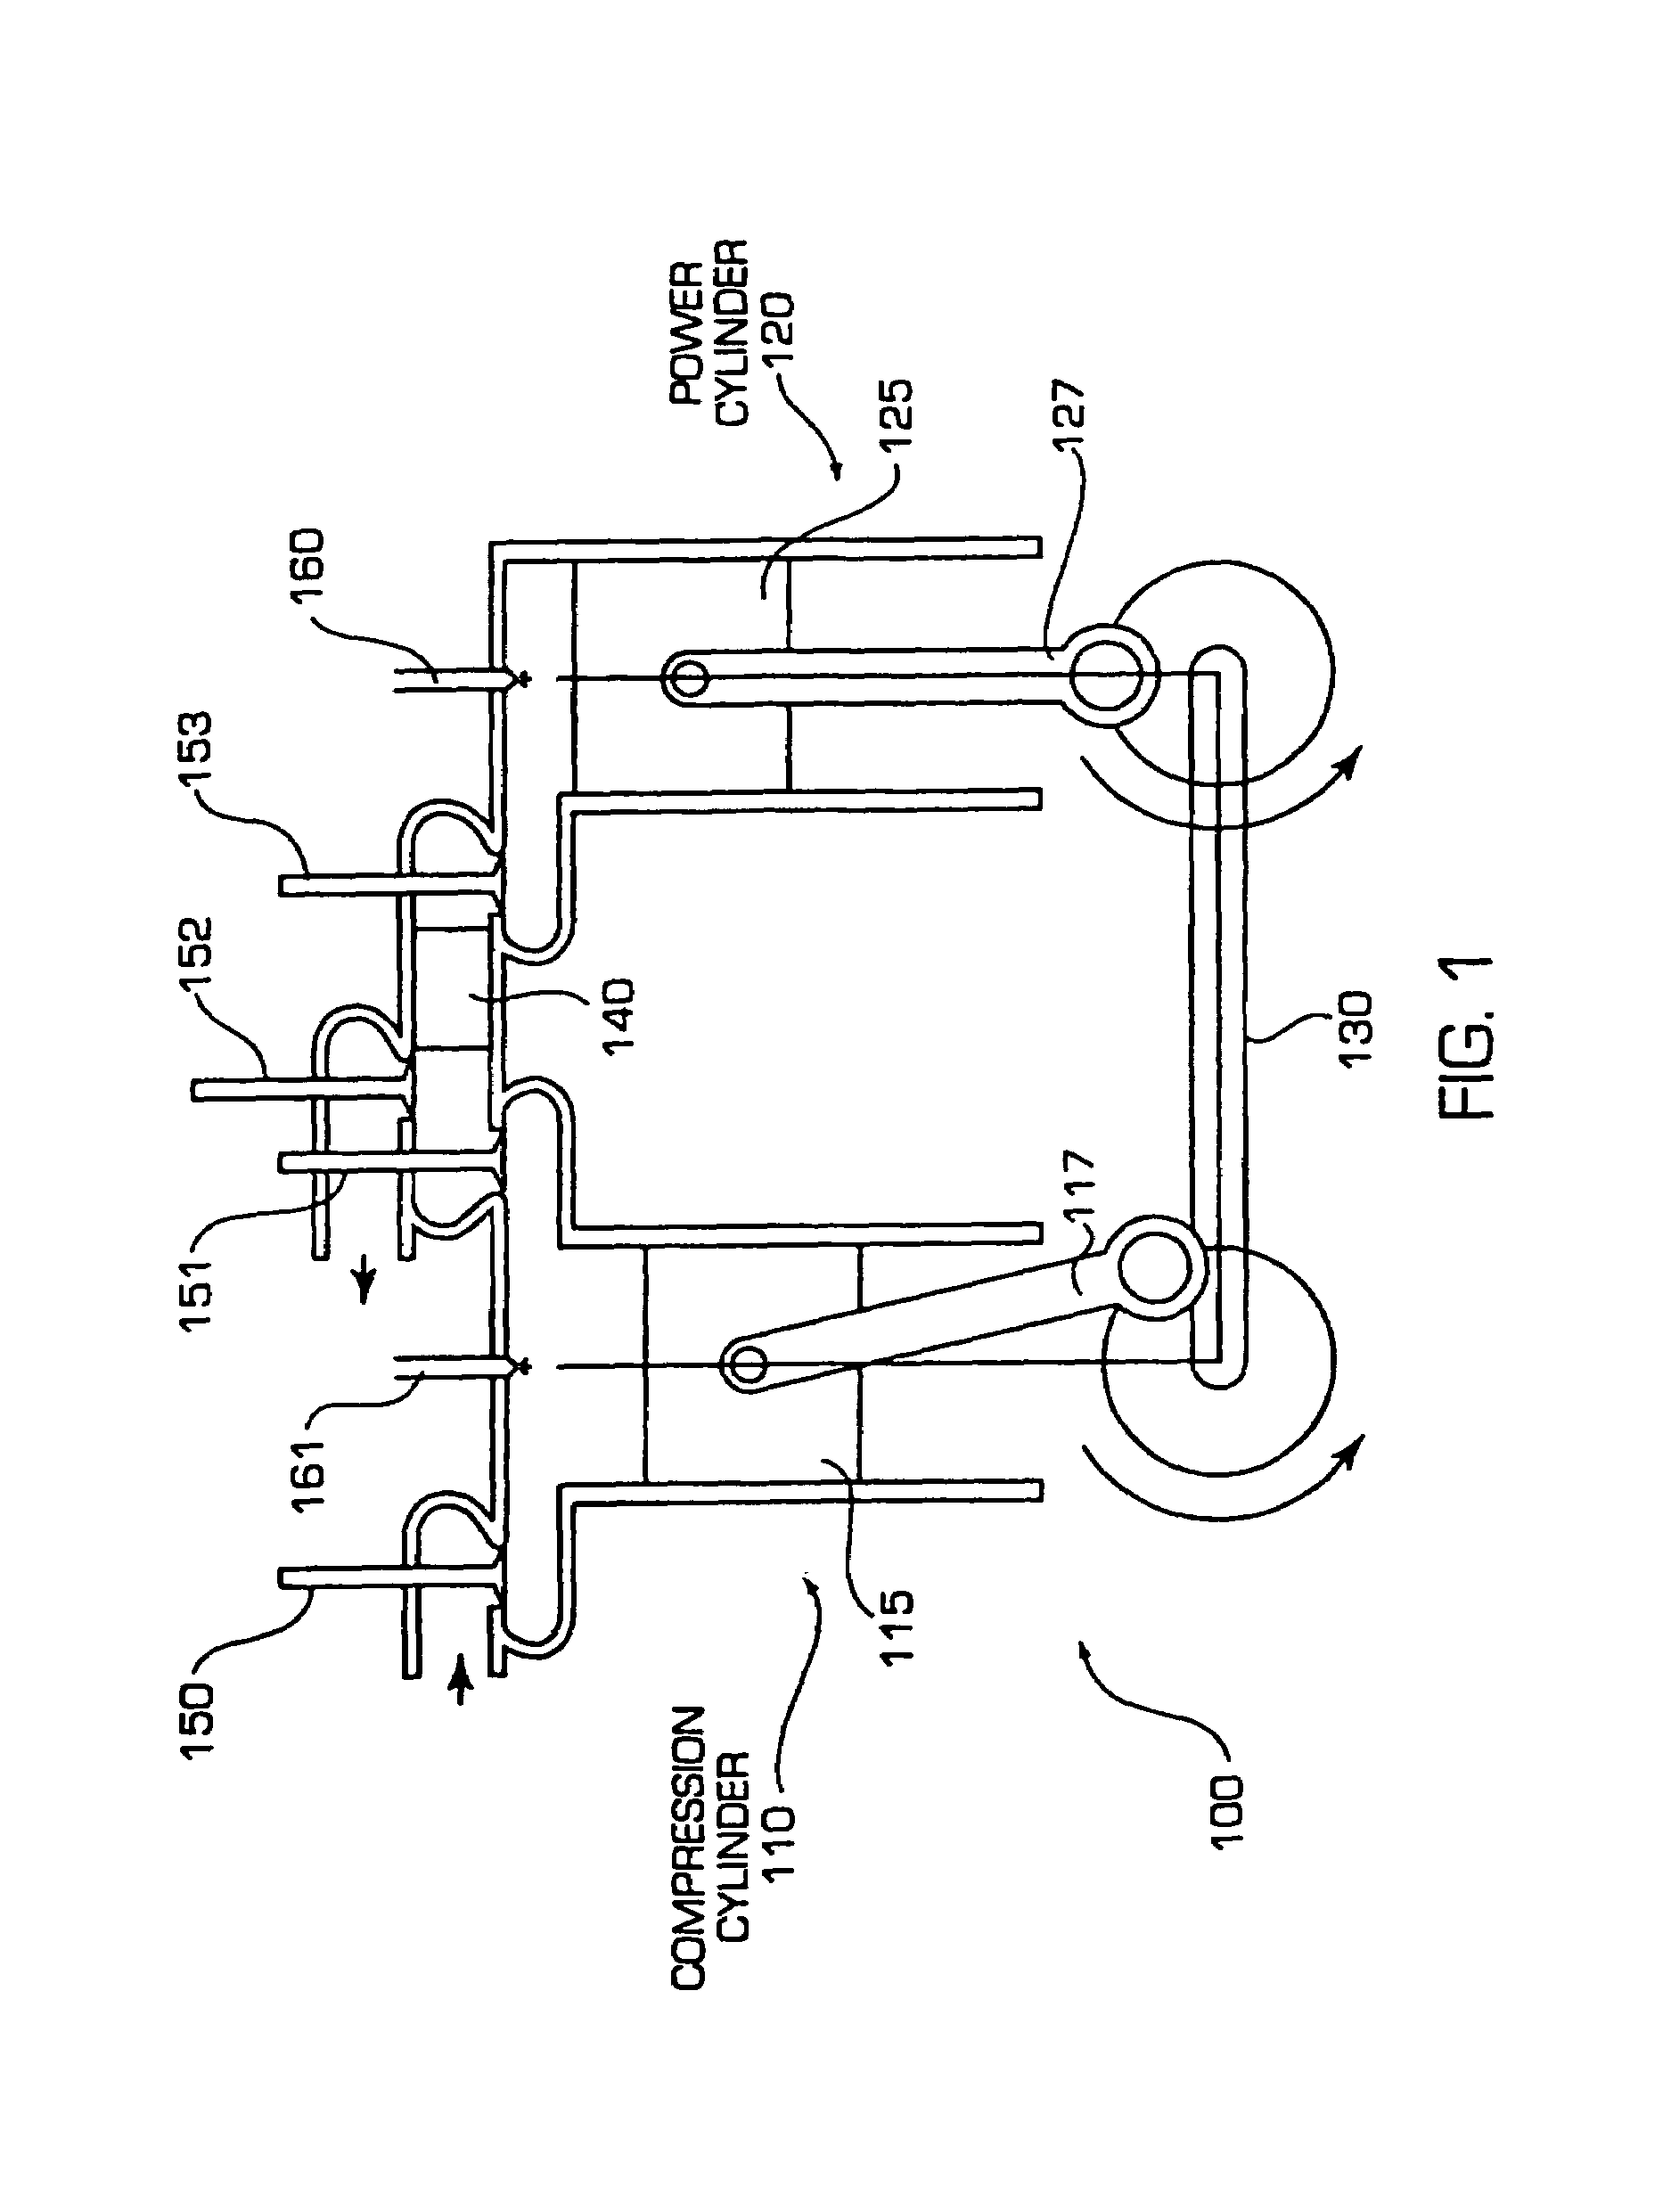 Internal combustion engine with regenerator, hot air ignition, and naturally aspirated engine control